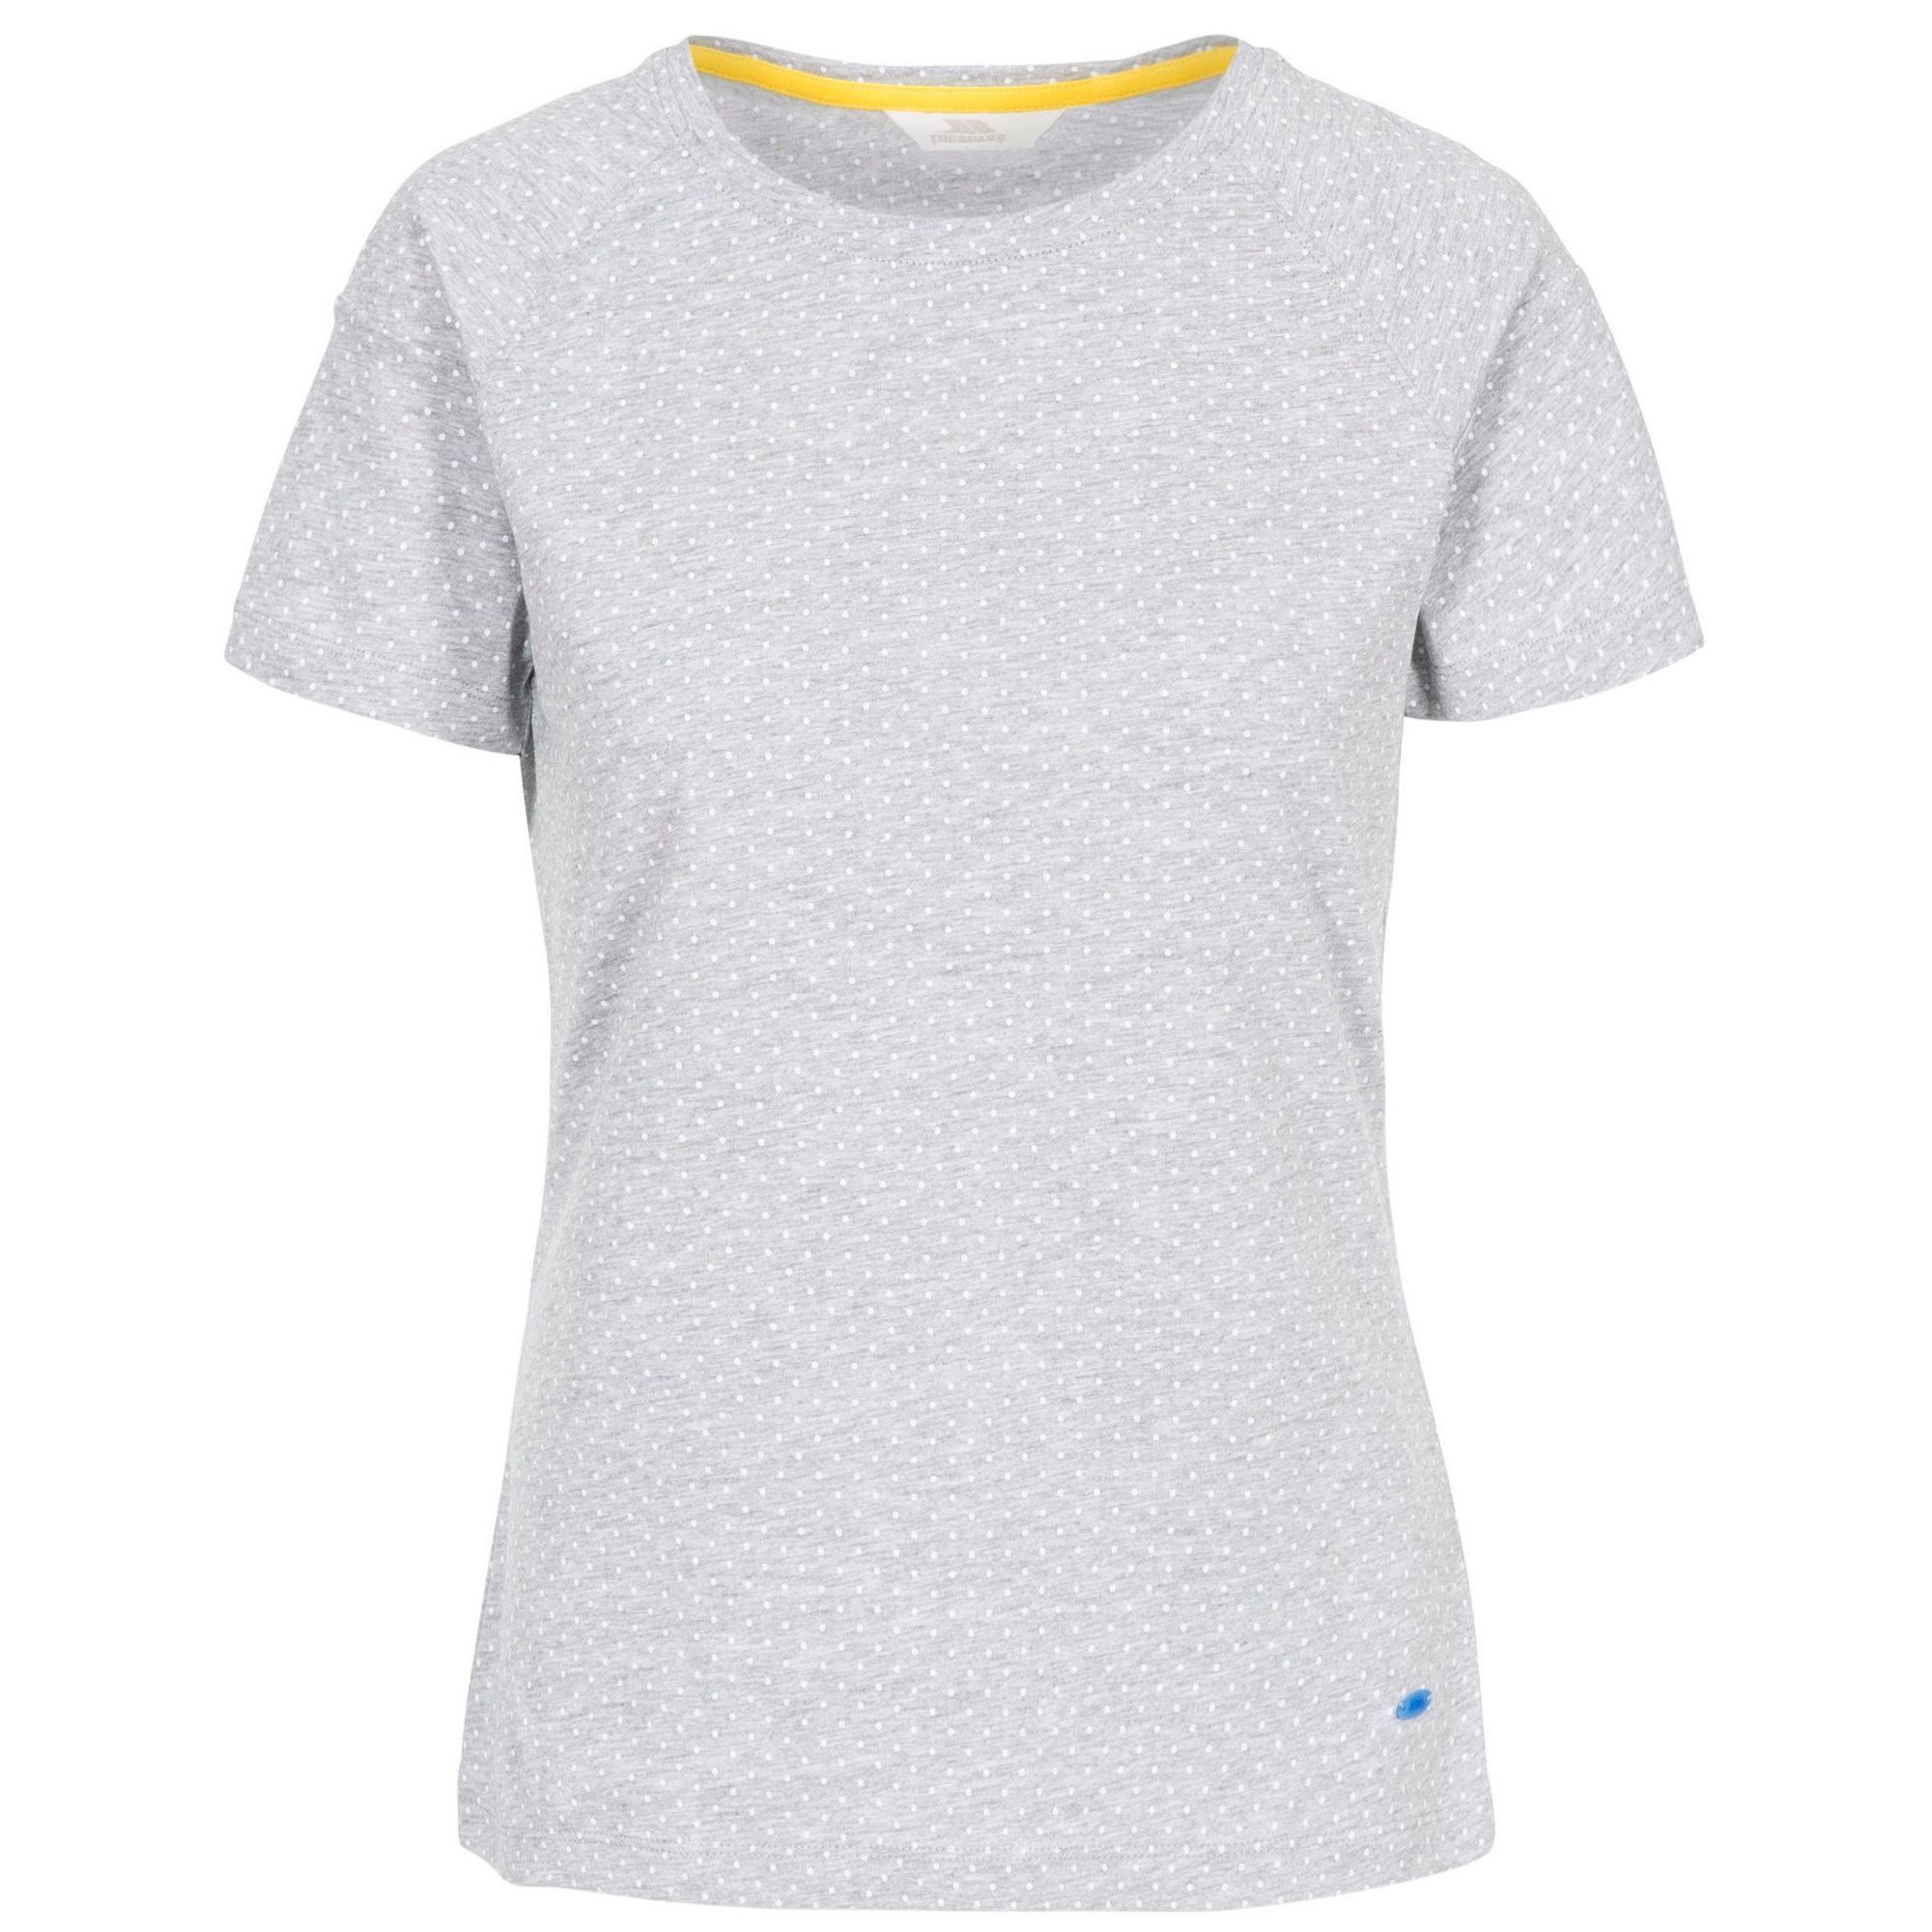 60% Cotton, 40% Polyester. Short sleeve raglan. Round neck. Contrast colour inner neck tape. All-over print. Trespass Womens Chest Sizing (approx): XS/8 - 32in/81cm, S/10 - 34in/86cm, M/12 - 36in/91.4cm, L/14 - 38in/96.5cm, XL/16 - 40in/101.5cm, XXL/18 - 42in/106.5cm.